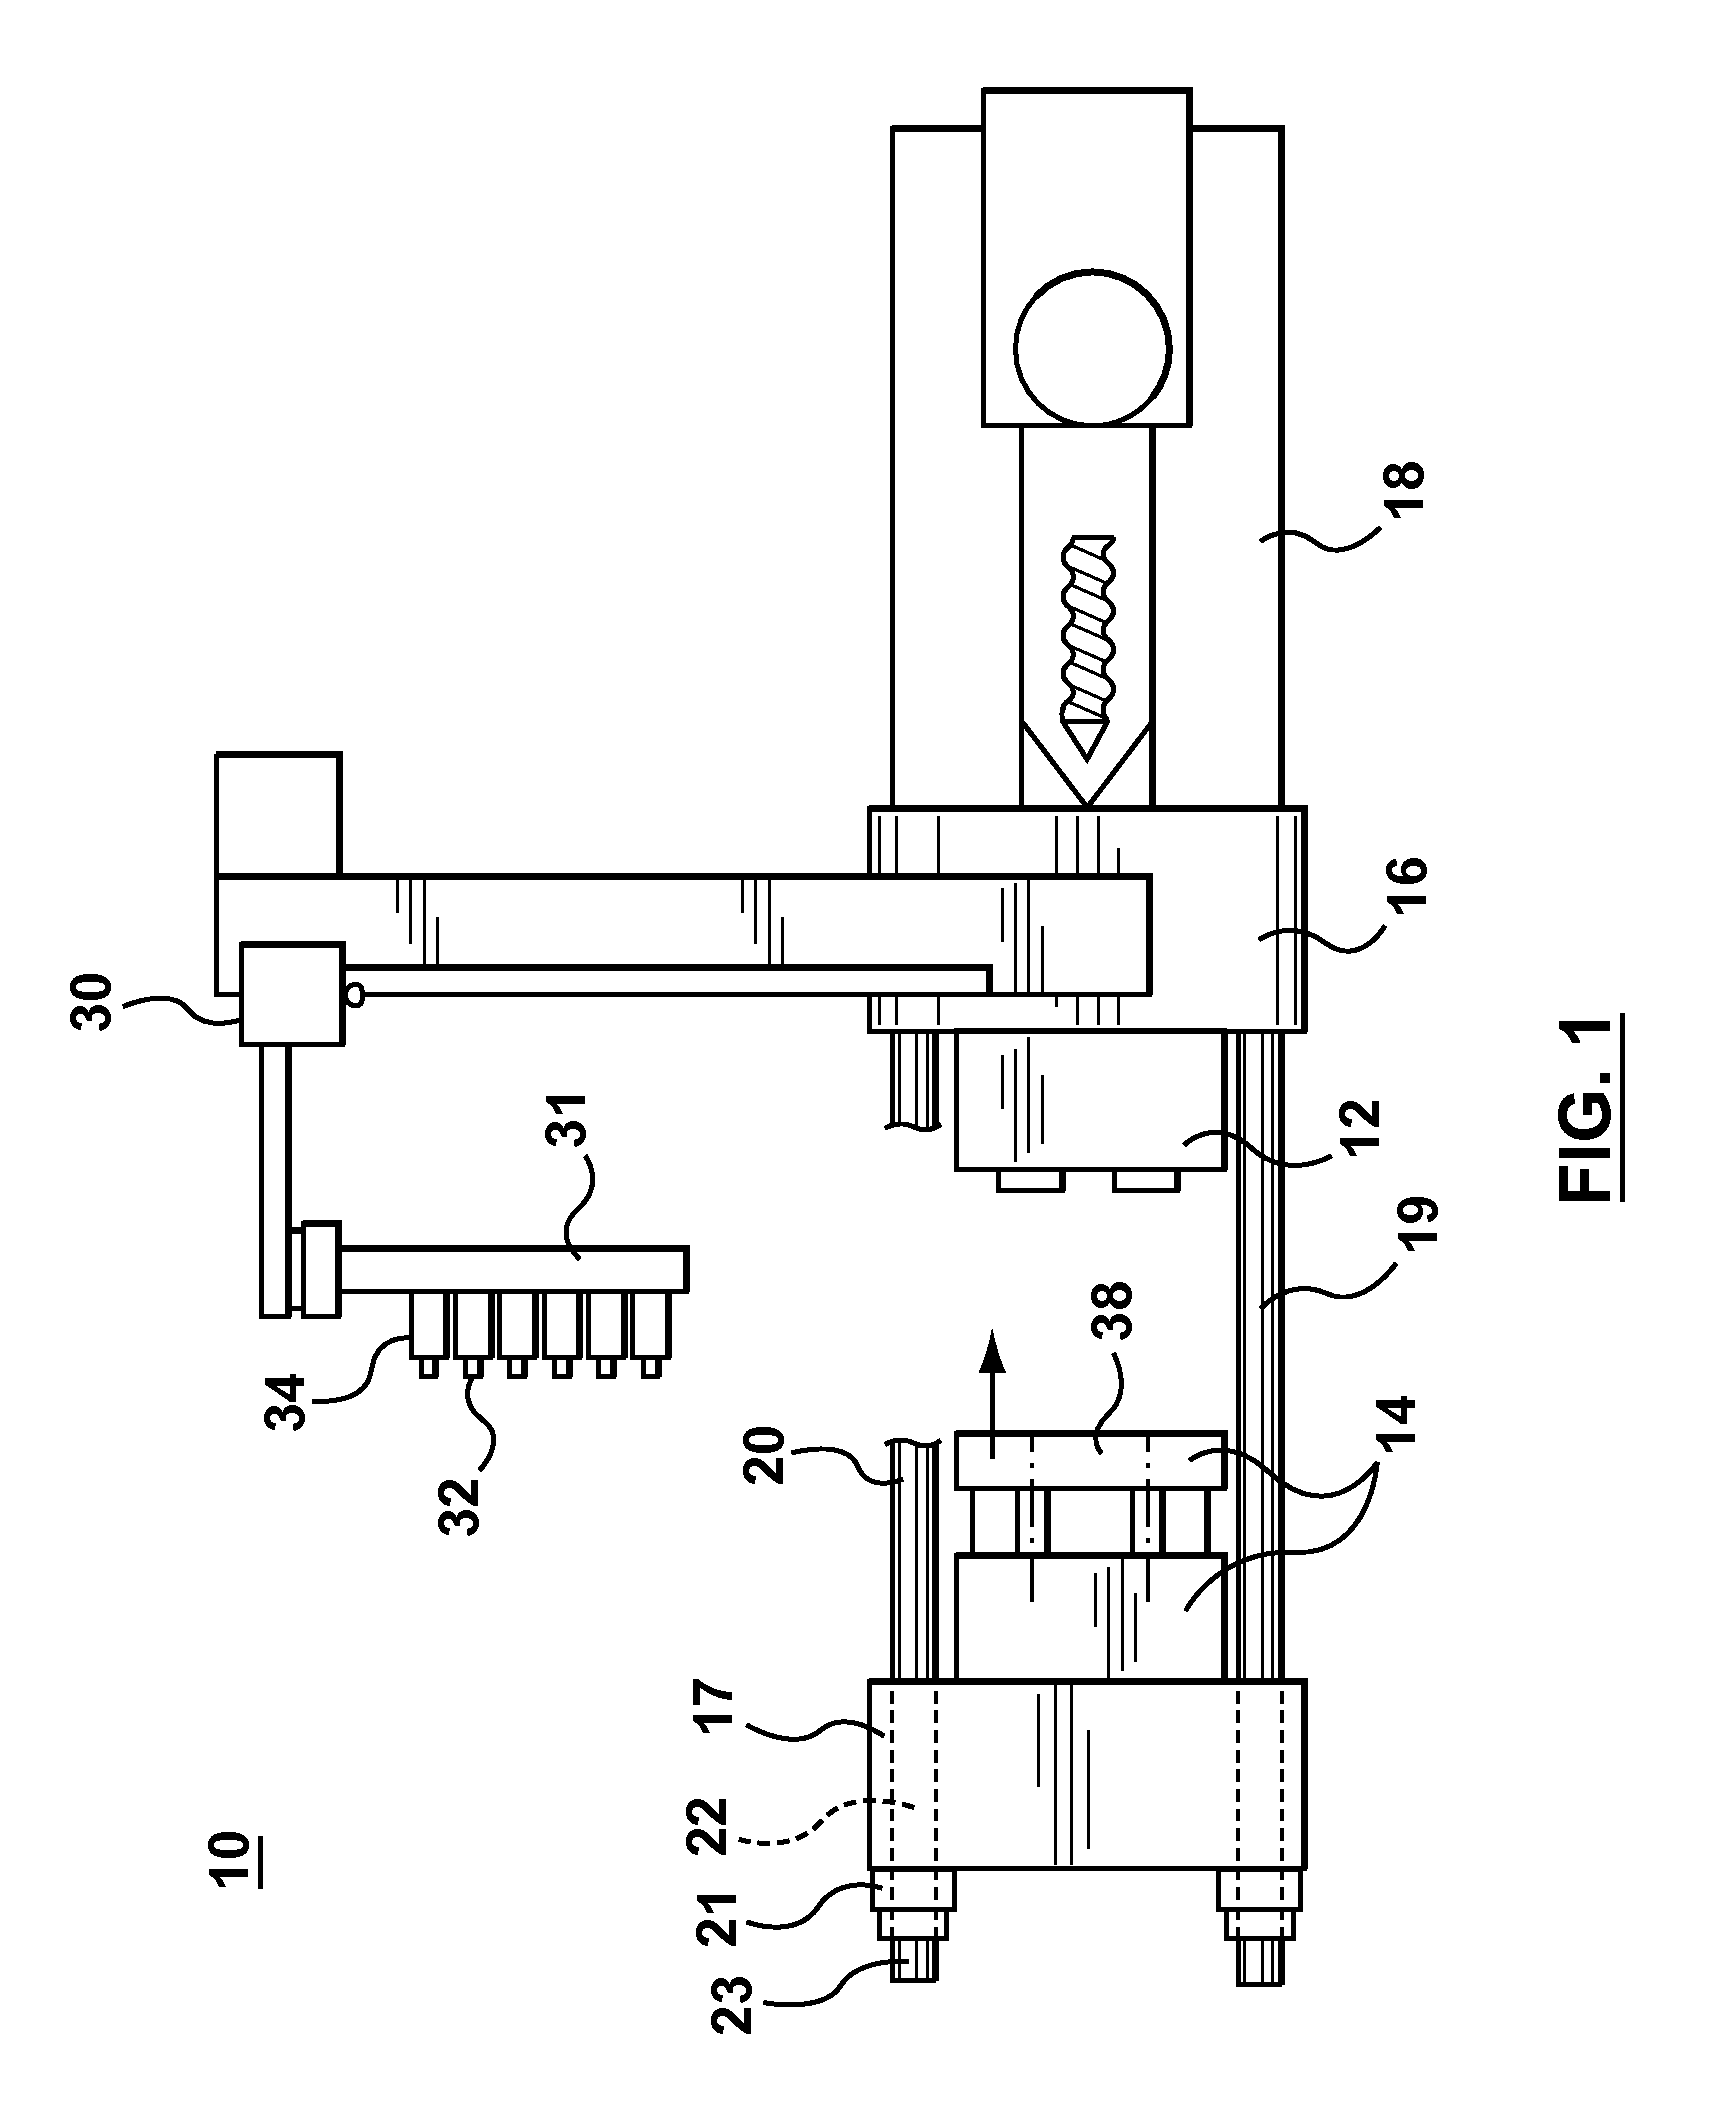 Platen assembly, molding system and method for platen orientation and alignment